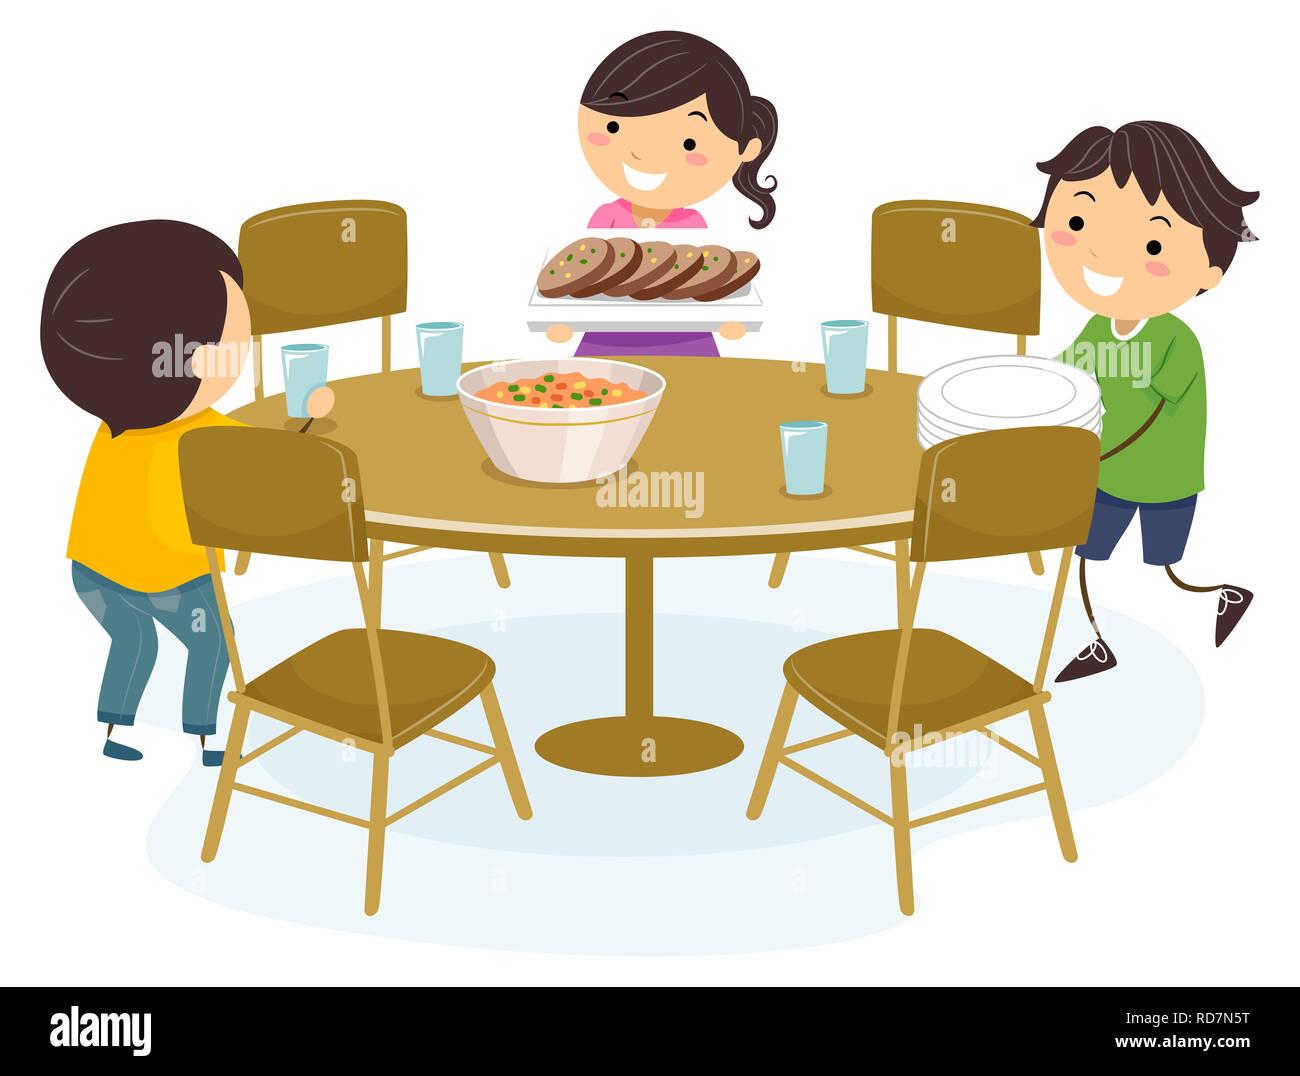 Illustration of Stickman Kids Setting the Dining Table, Placing Glasses